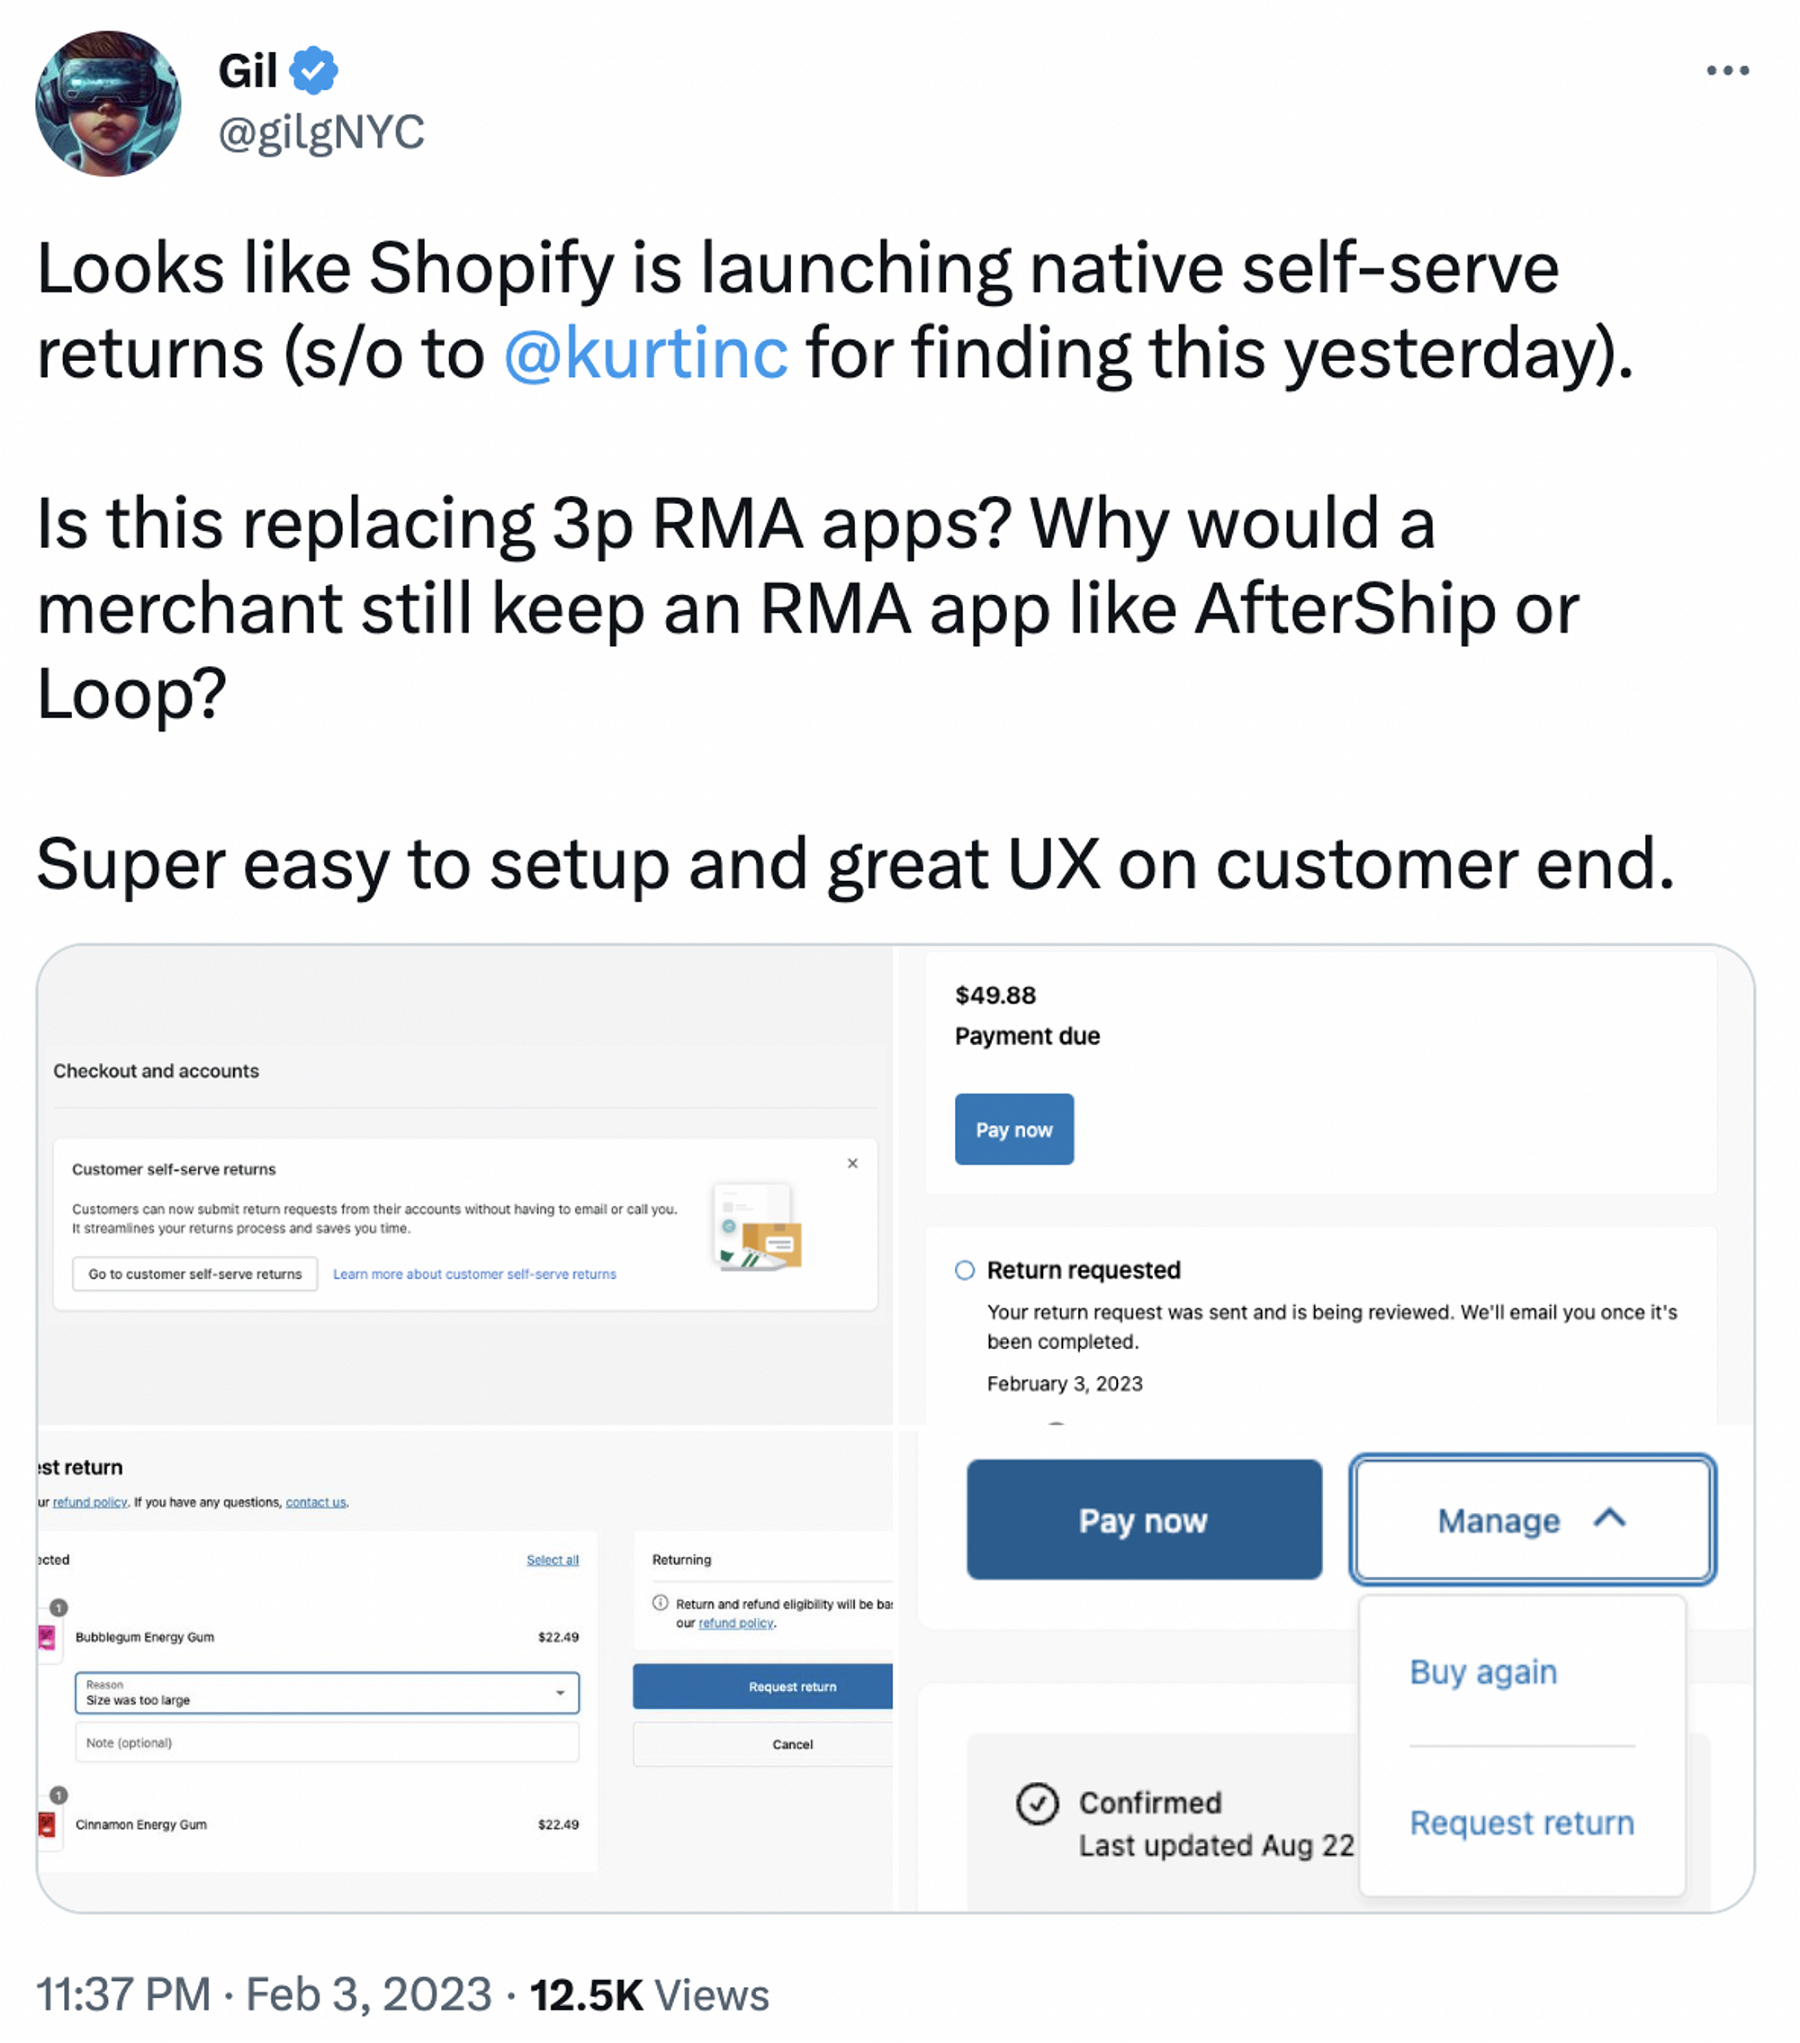 Shopify introducing their own returns functionality